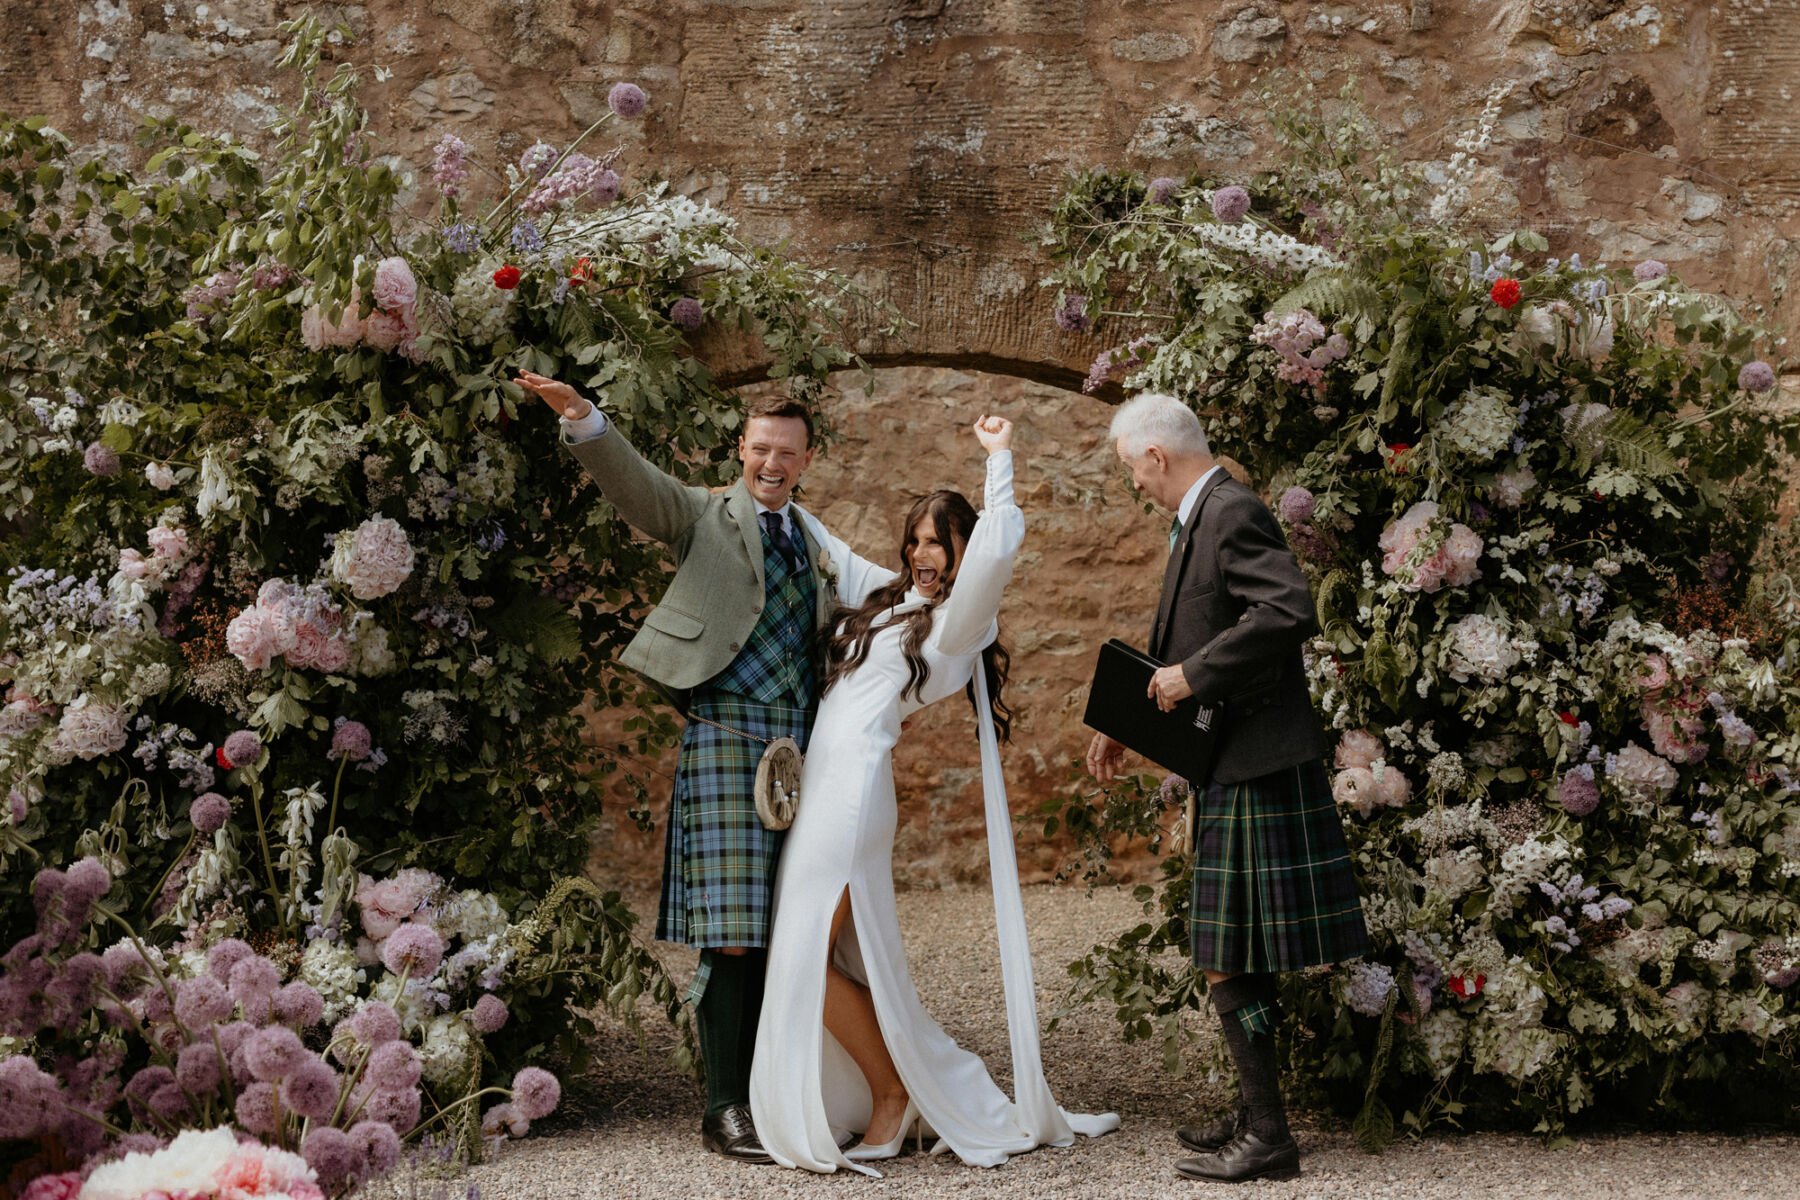 Bride and groom throwing fist punches by their floral backdrop after being declared man and wife